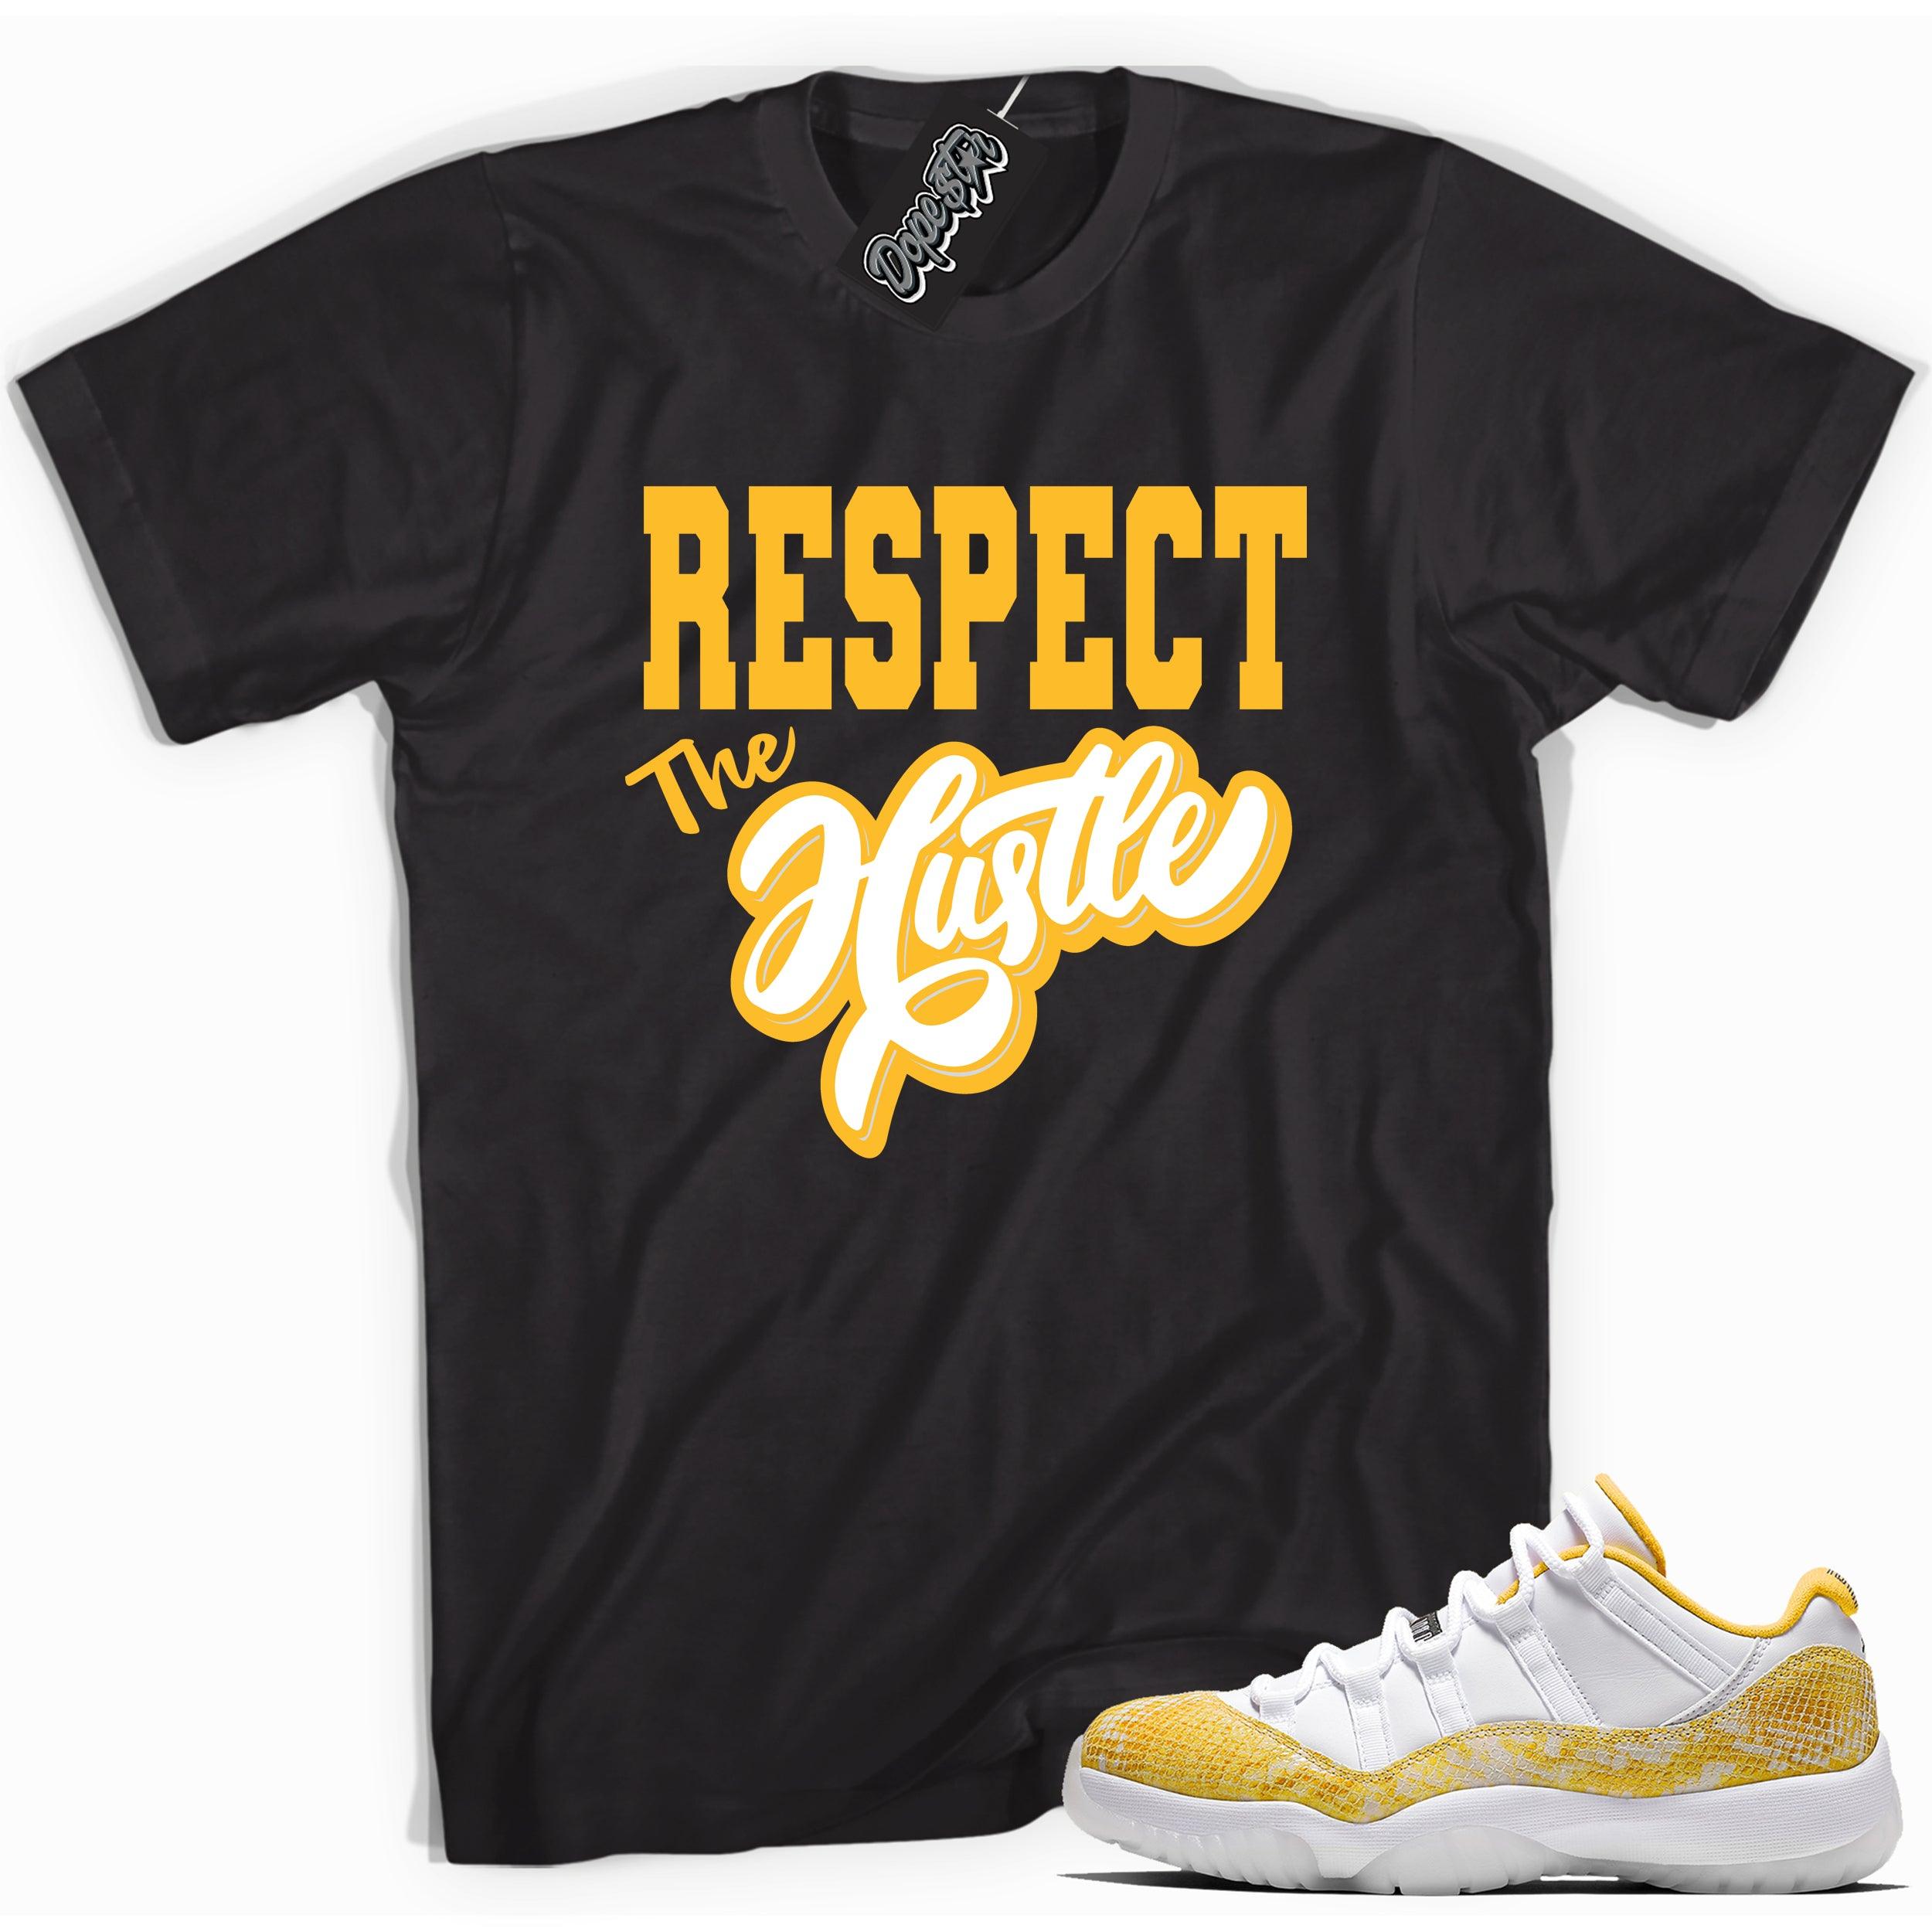 Cool black graphic tee with 'respect the hustle' print, that perfectly matches  Air Jordan 11 Retro Low Yellow Snakeskin sneakers